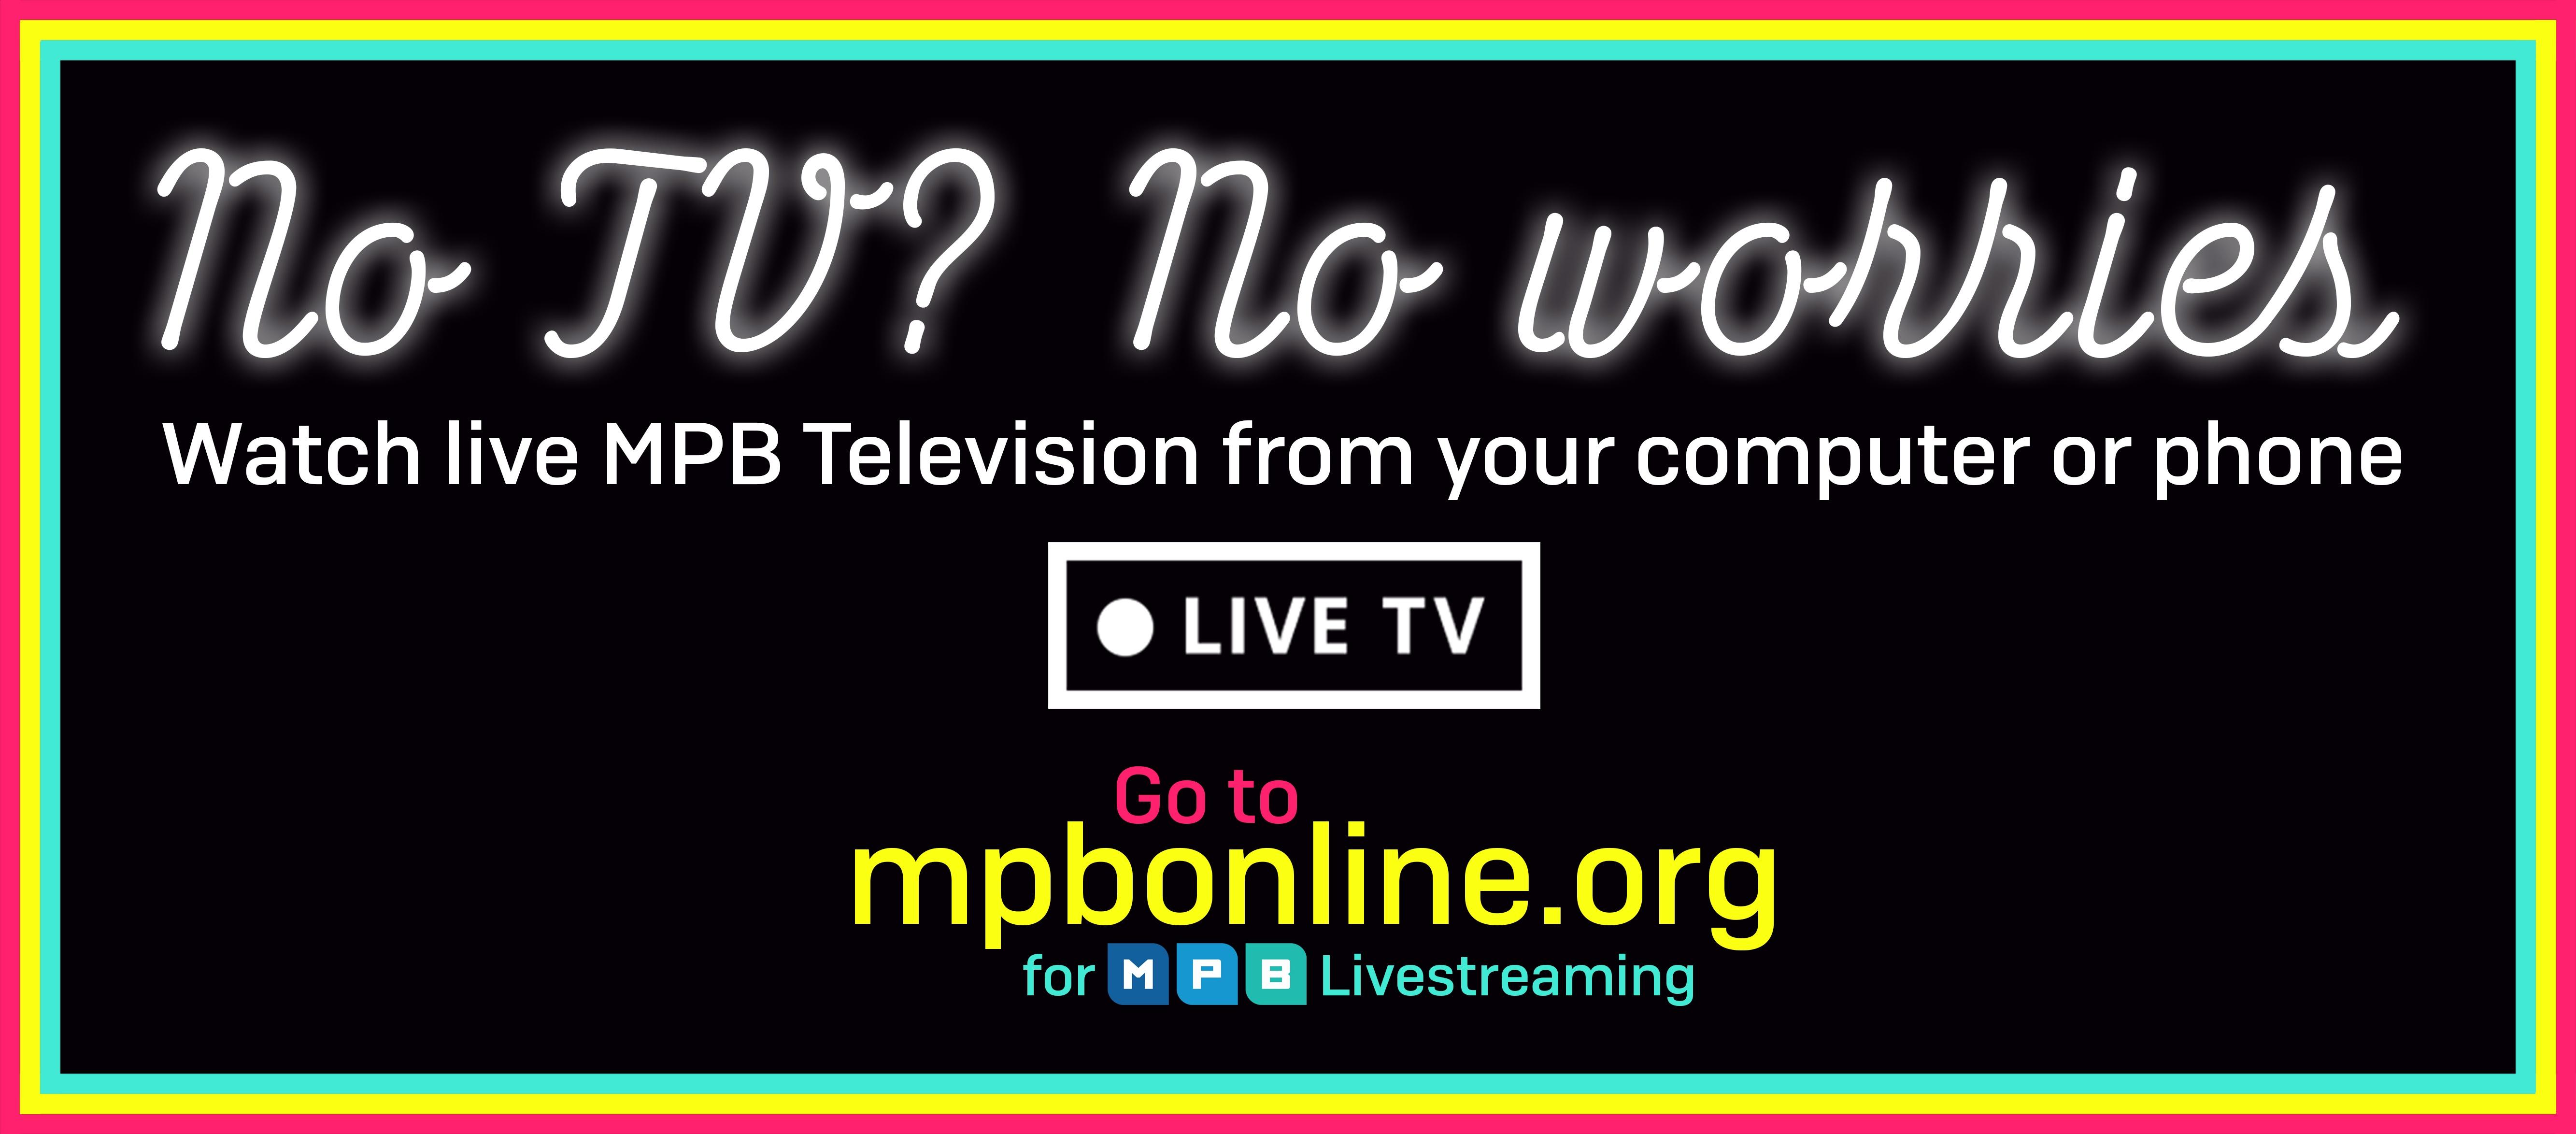 Watch live MPB Television from your computer